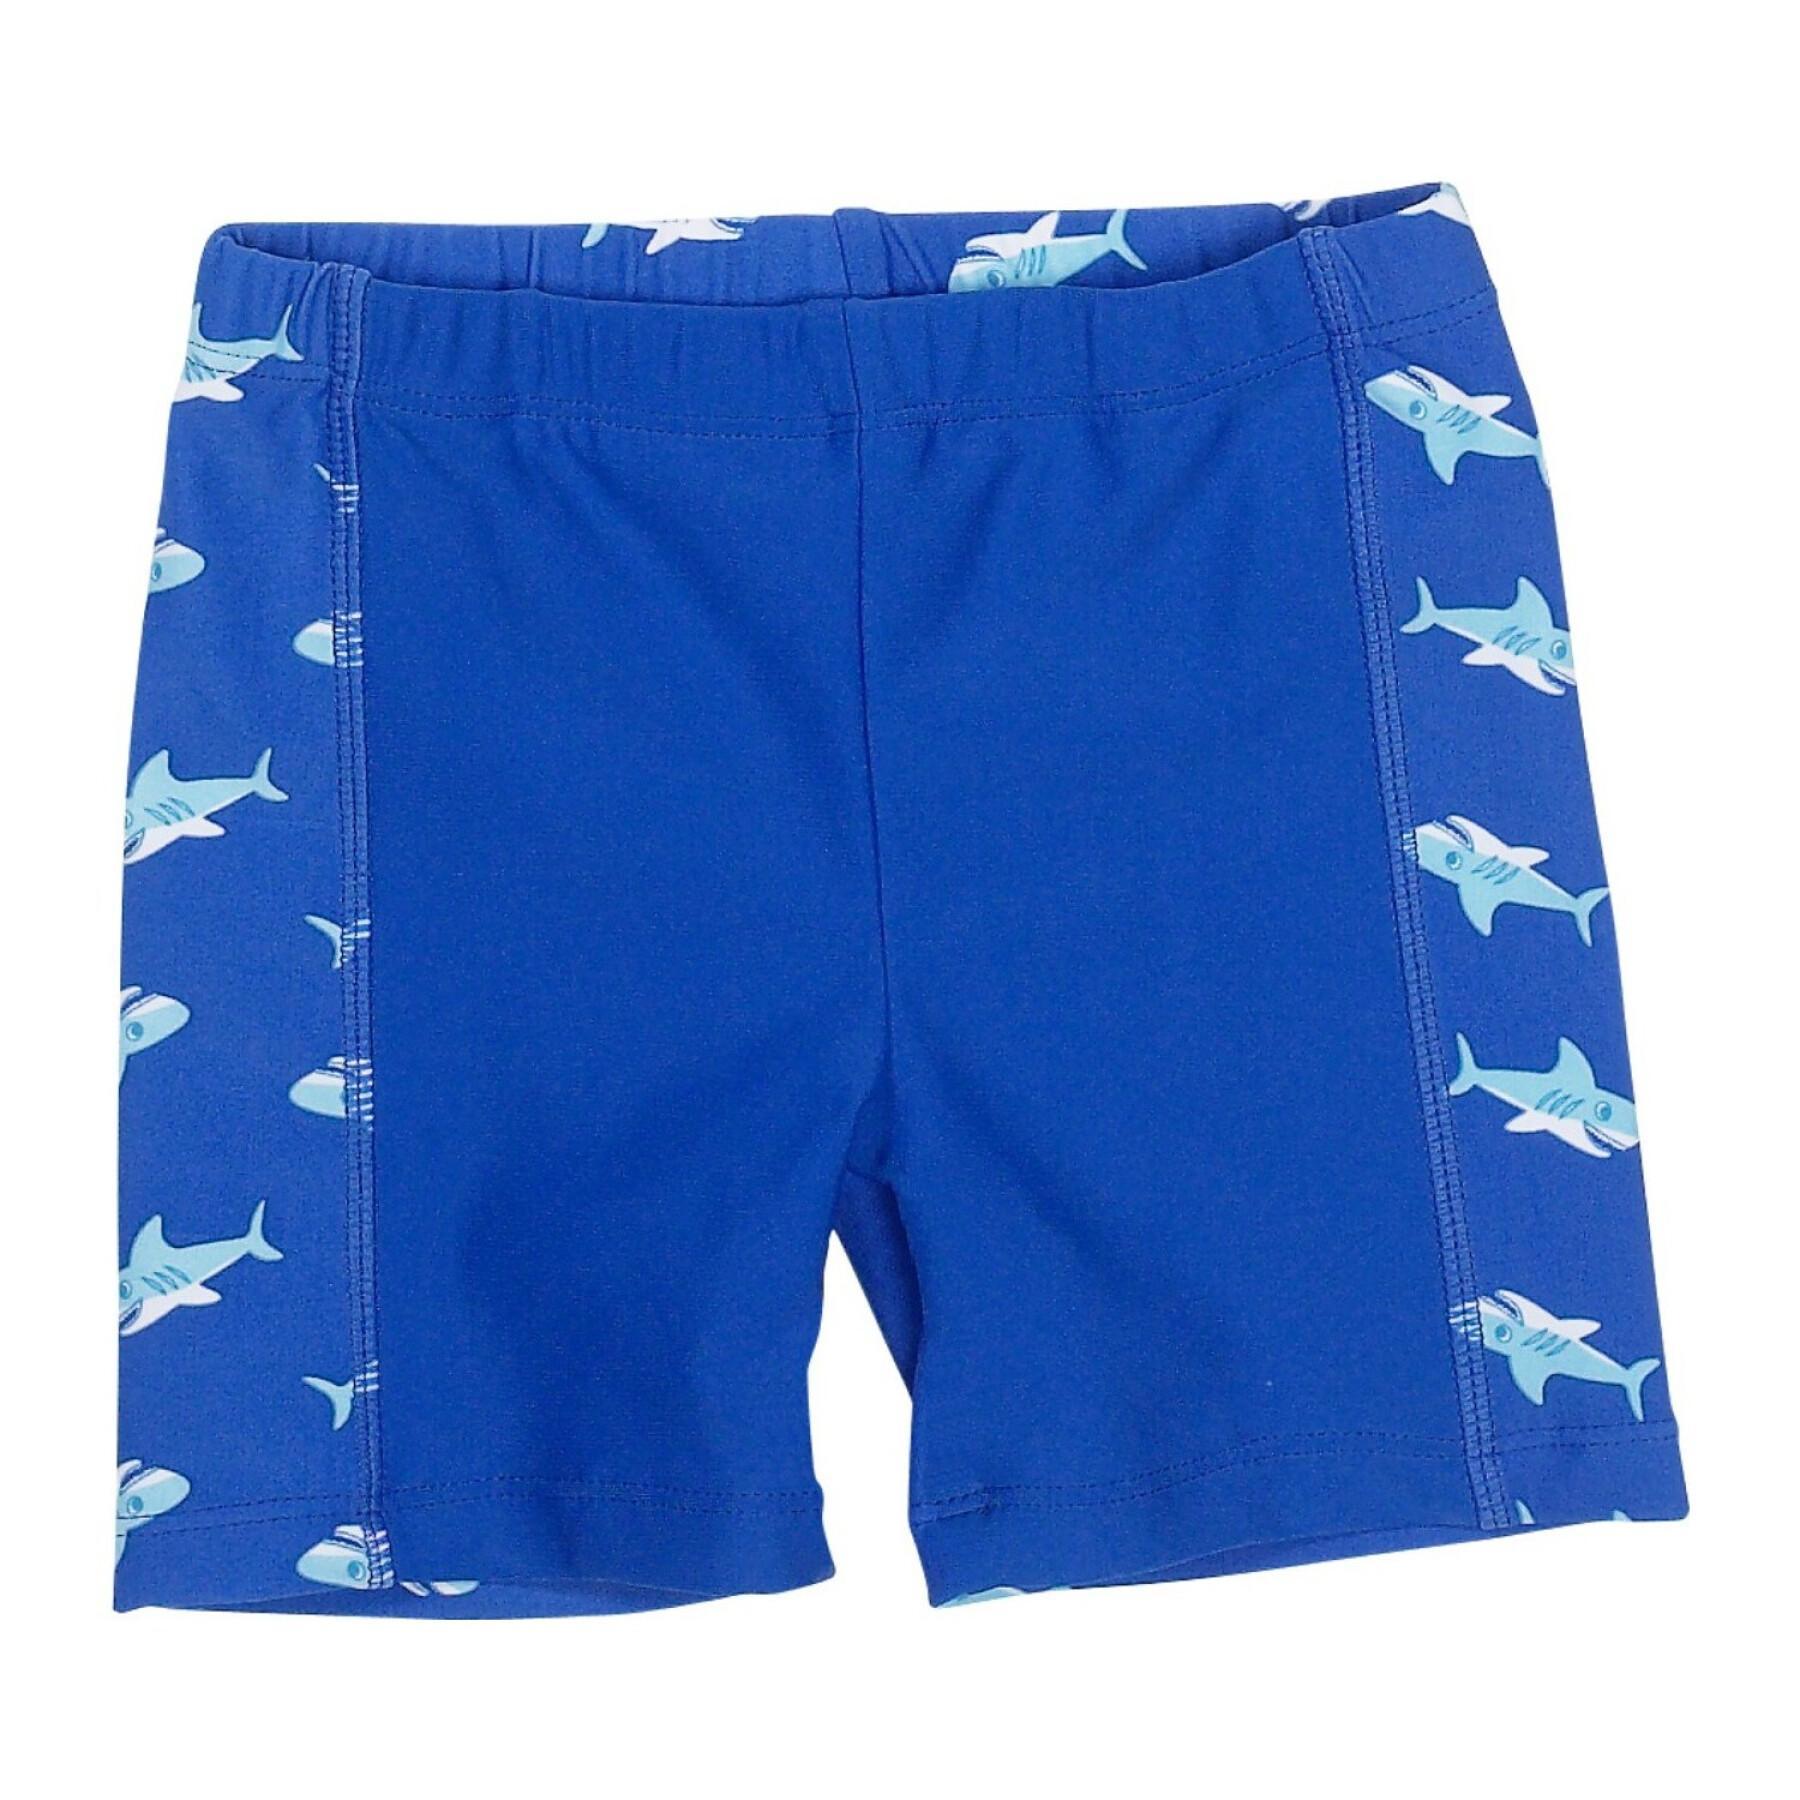 Children's swim shorts with uv protection Playshoes Shark